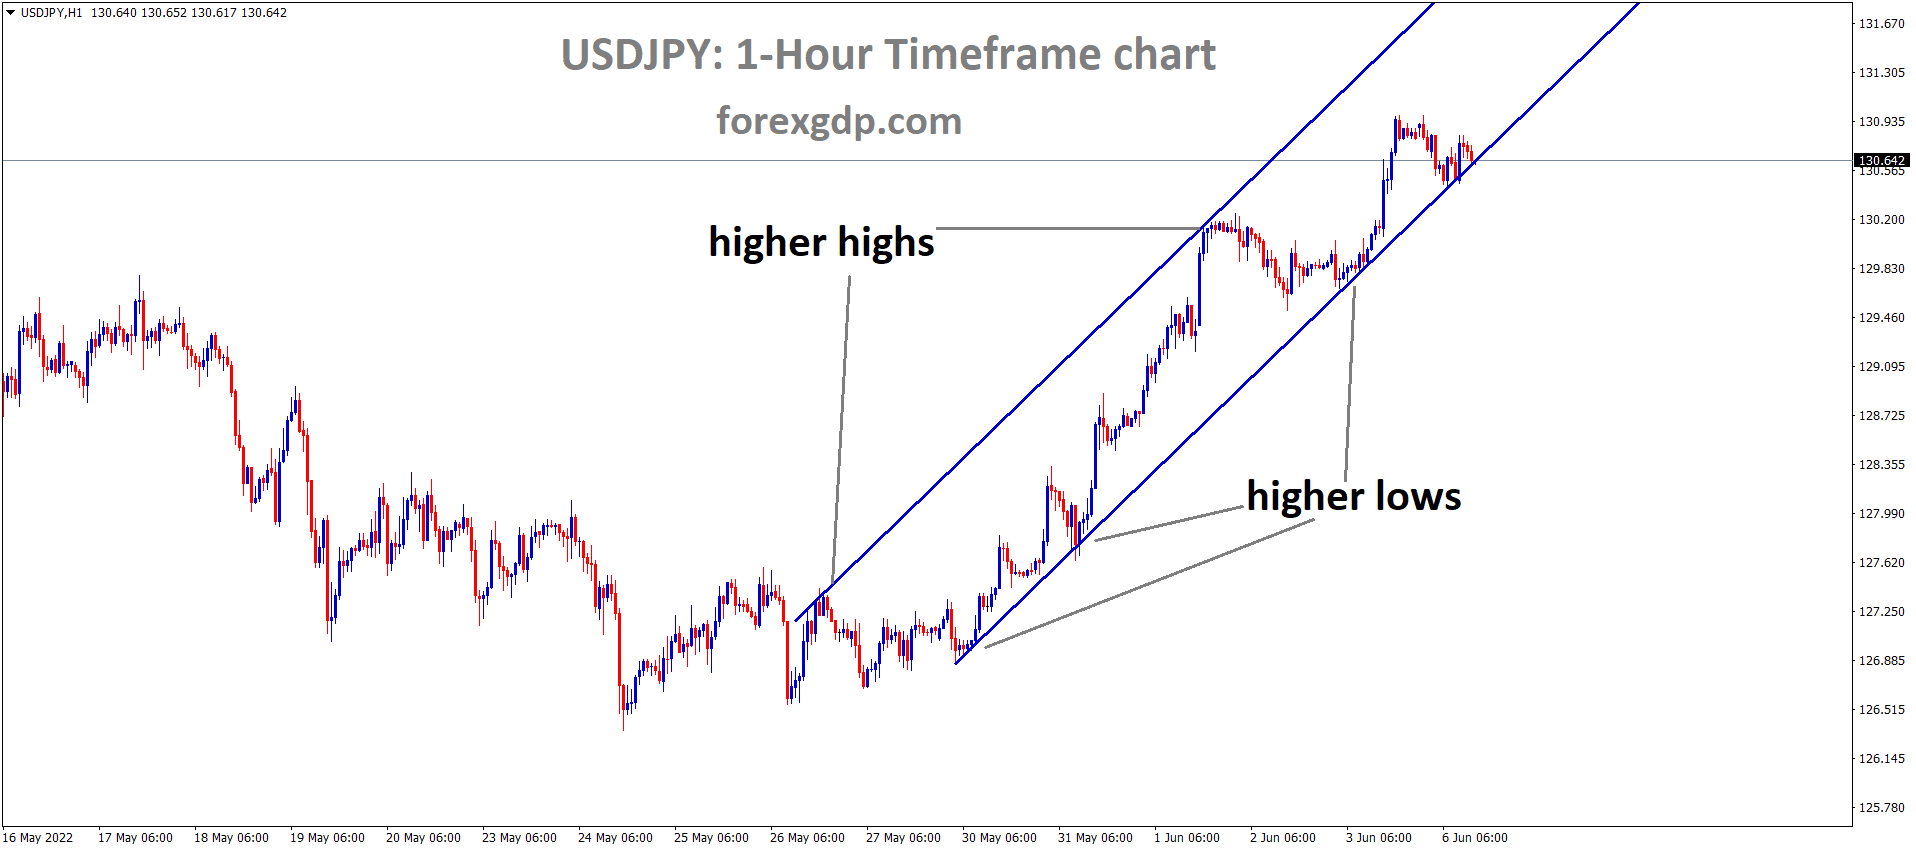 USDJPY H1 Time Frame Analysis Market is moving in an Ascending channel and the Market has reached the higher low area of the channel